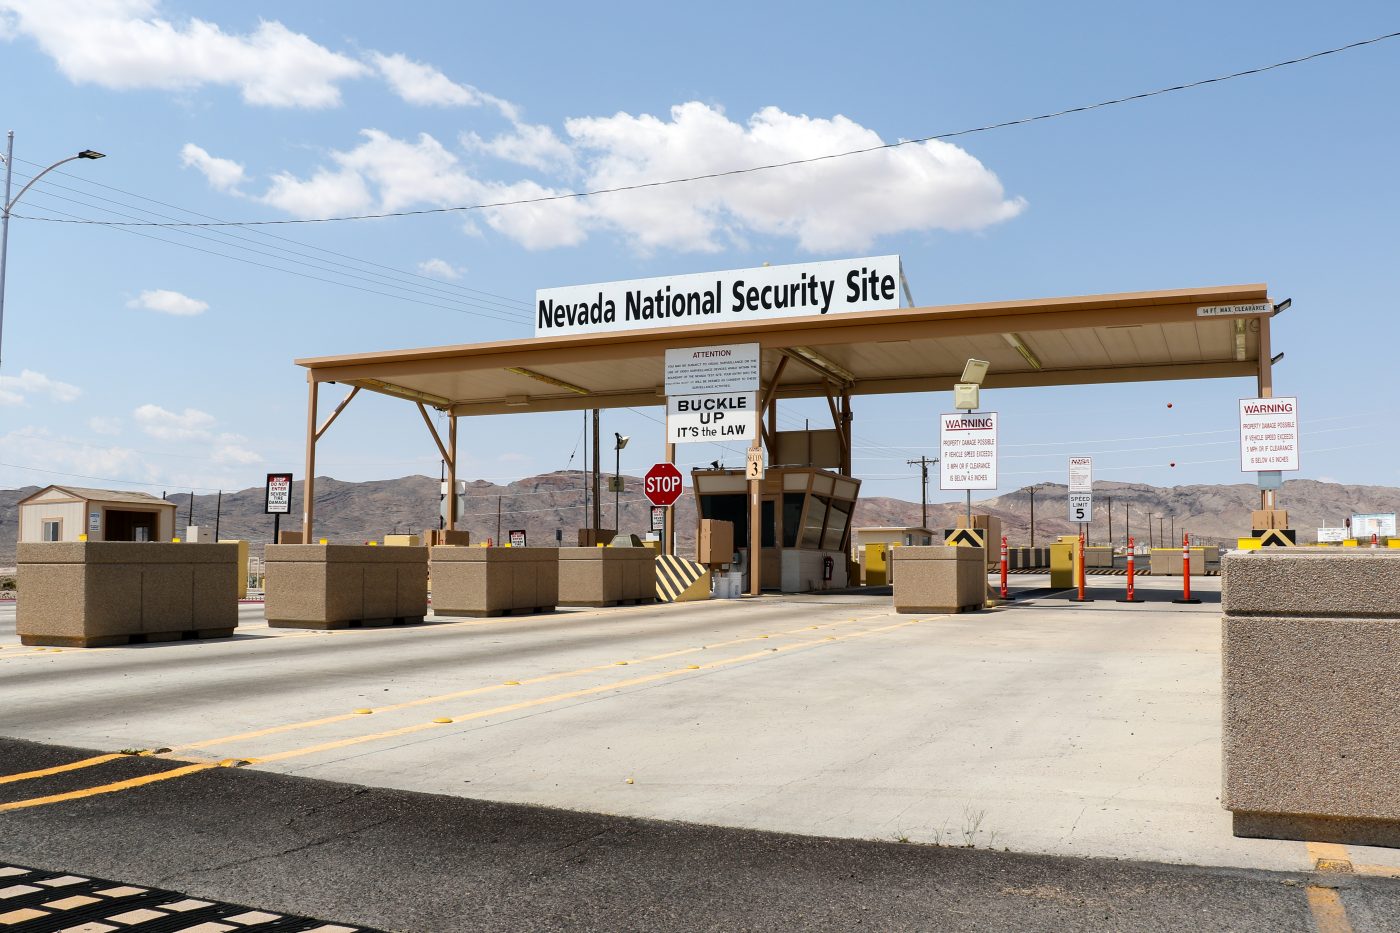 A road leads to the entrance gate of the Nevada National Security Site, where vehicles stop for a security checkpoint.